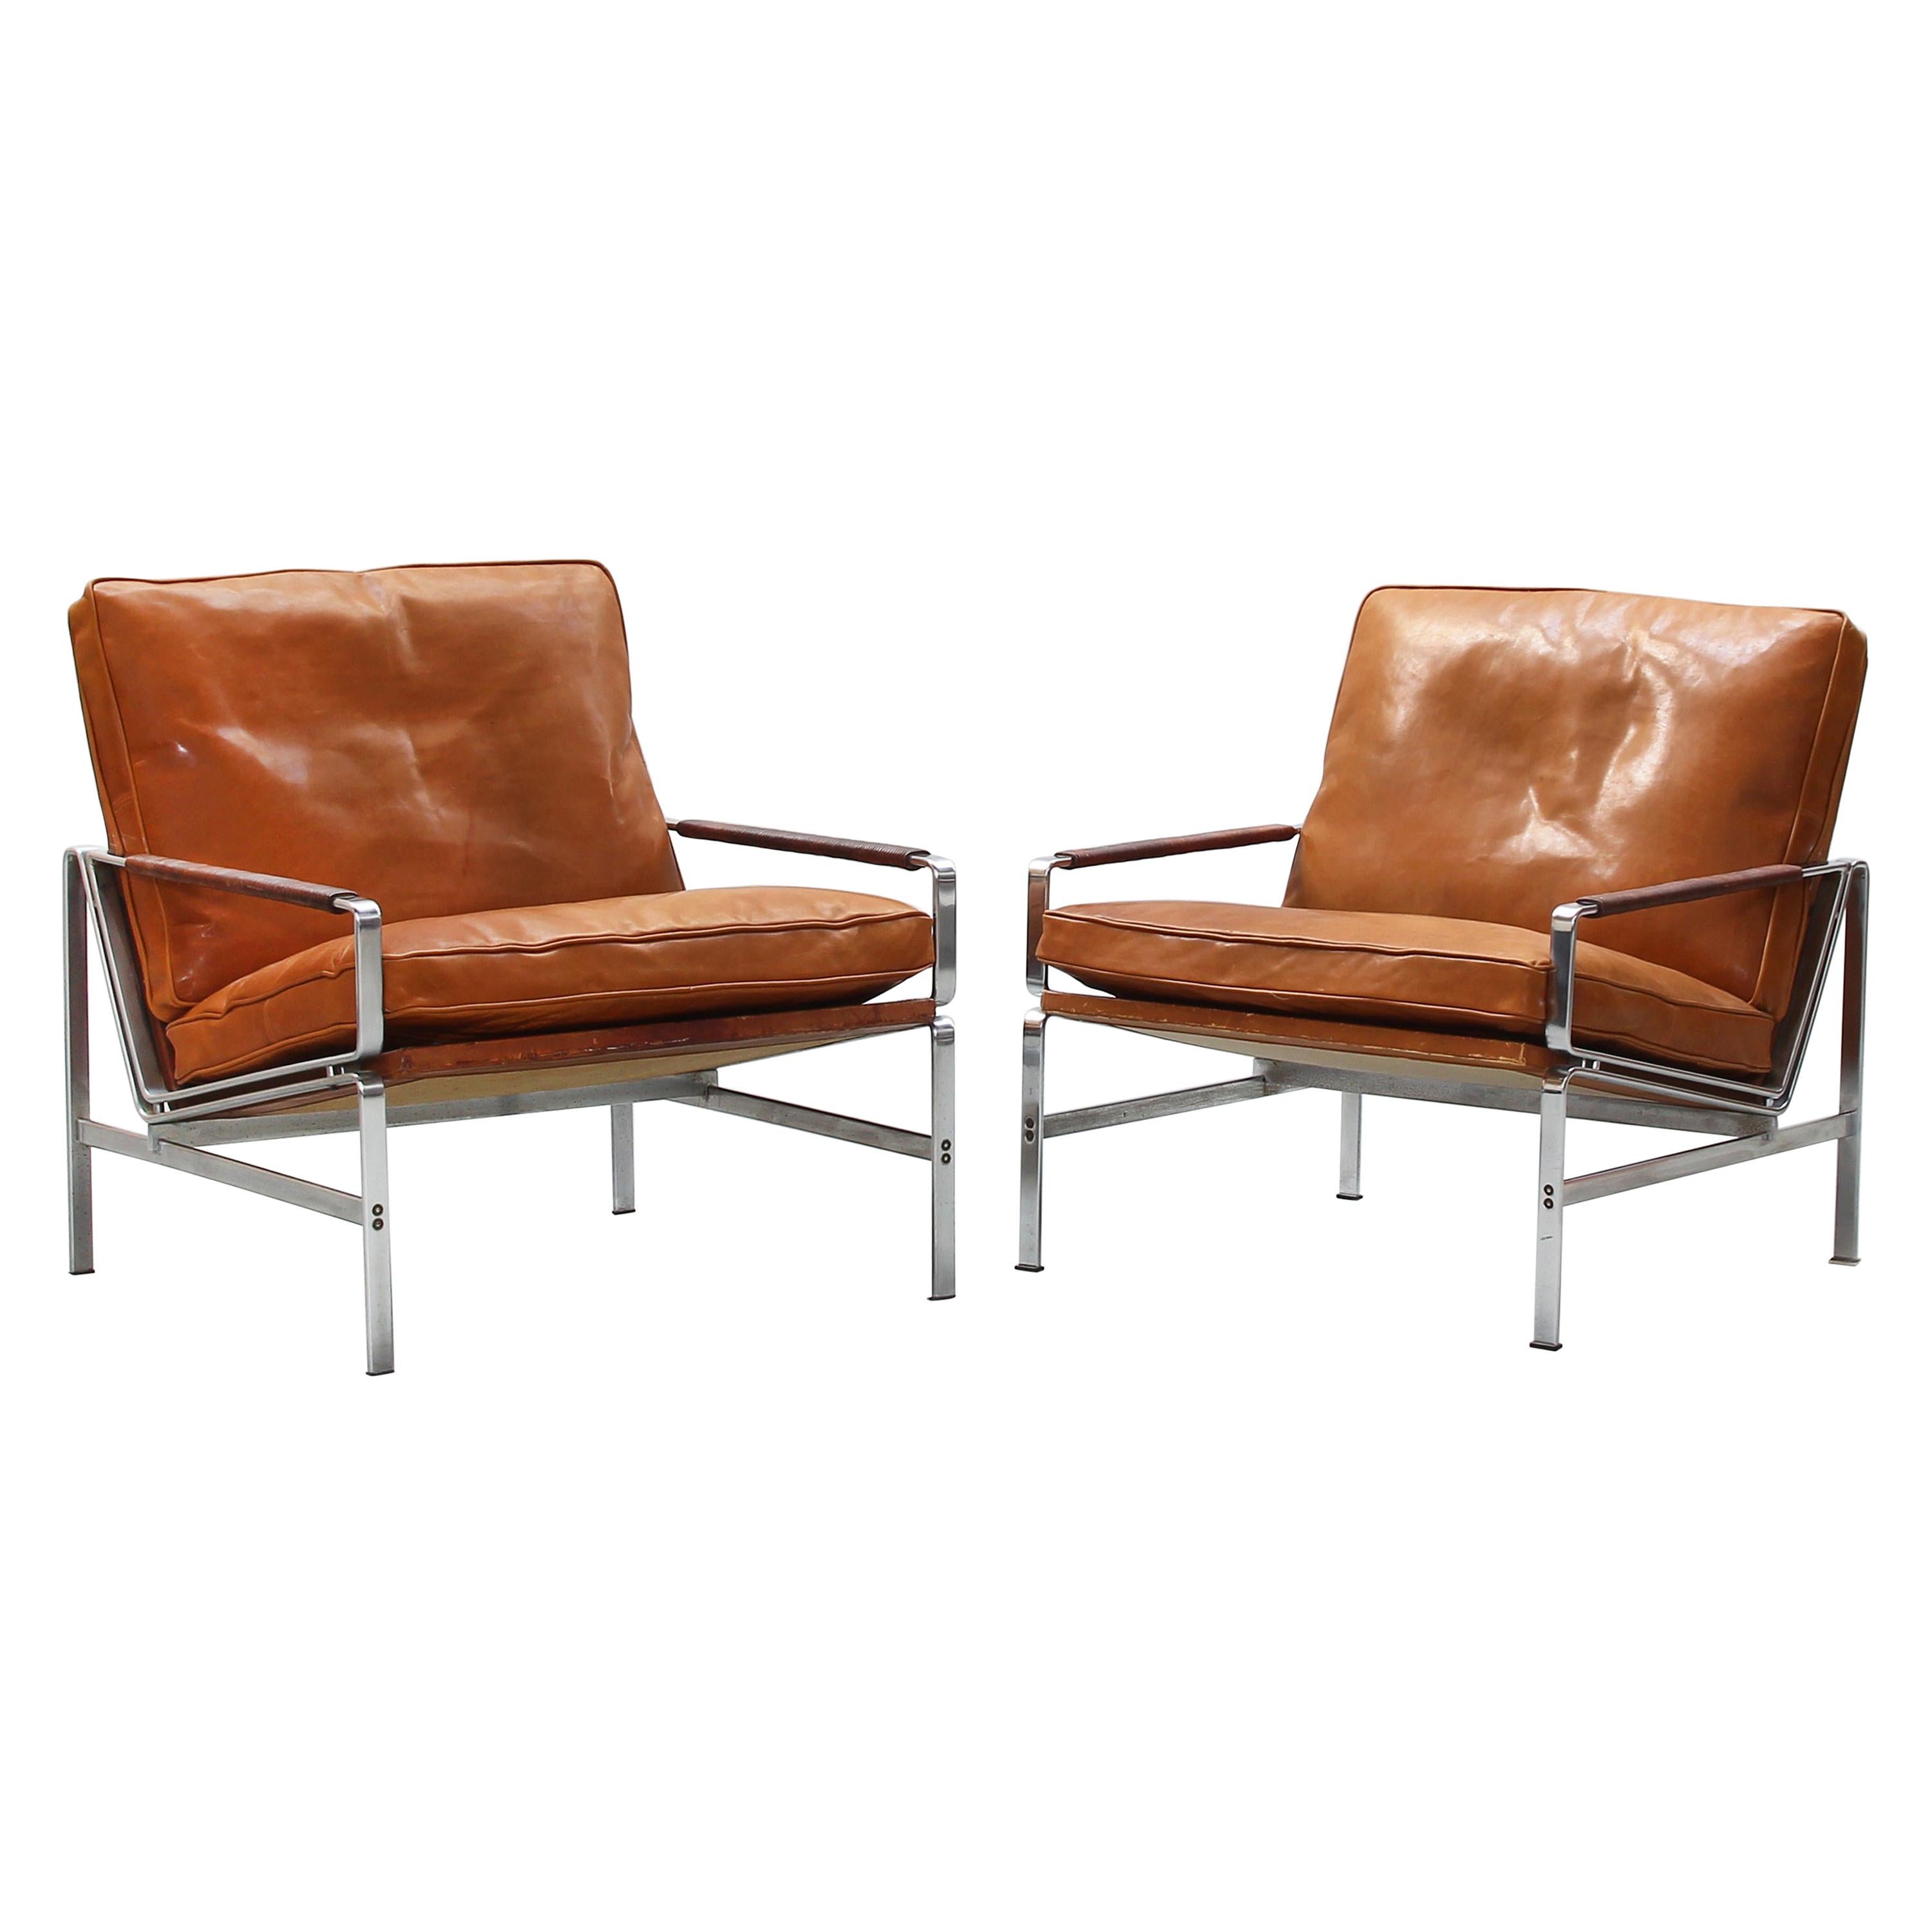 Two Danish Lounge Chairs 6720 by Fabricius & Kastholm for Kill International